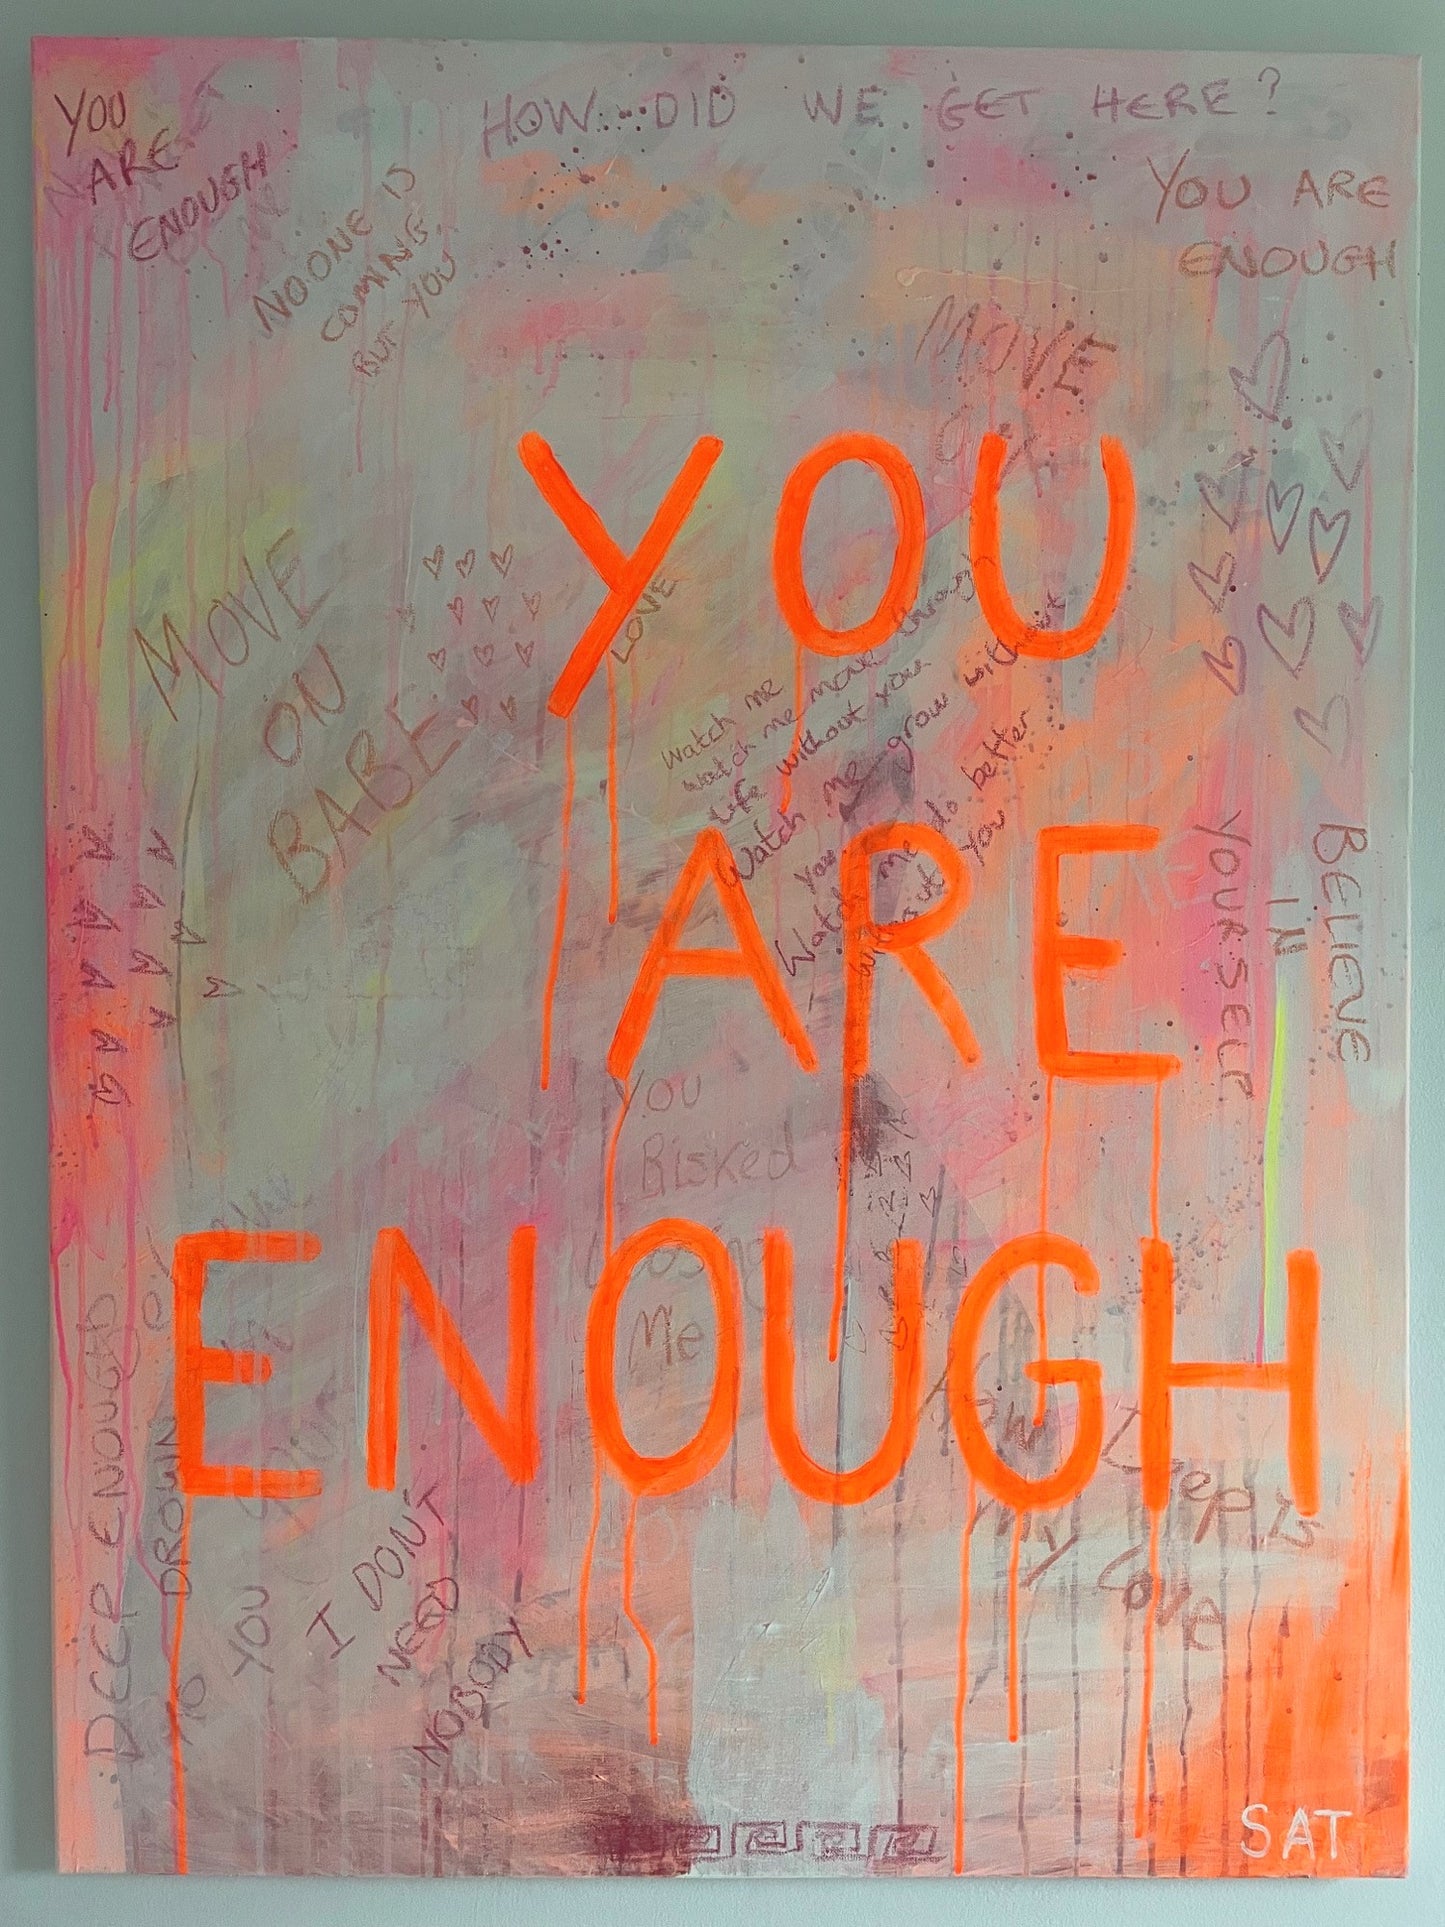 The painting 'You Are Enough' being displayed on a white wall. This piece has an abundance of words and sentances that overlap, bringing meaning. With the words You Are Enough at the forefront in neon orange writing.